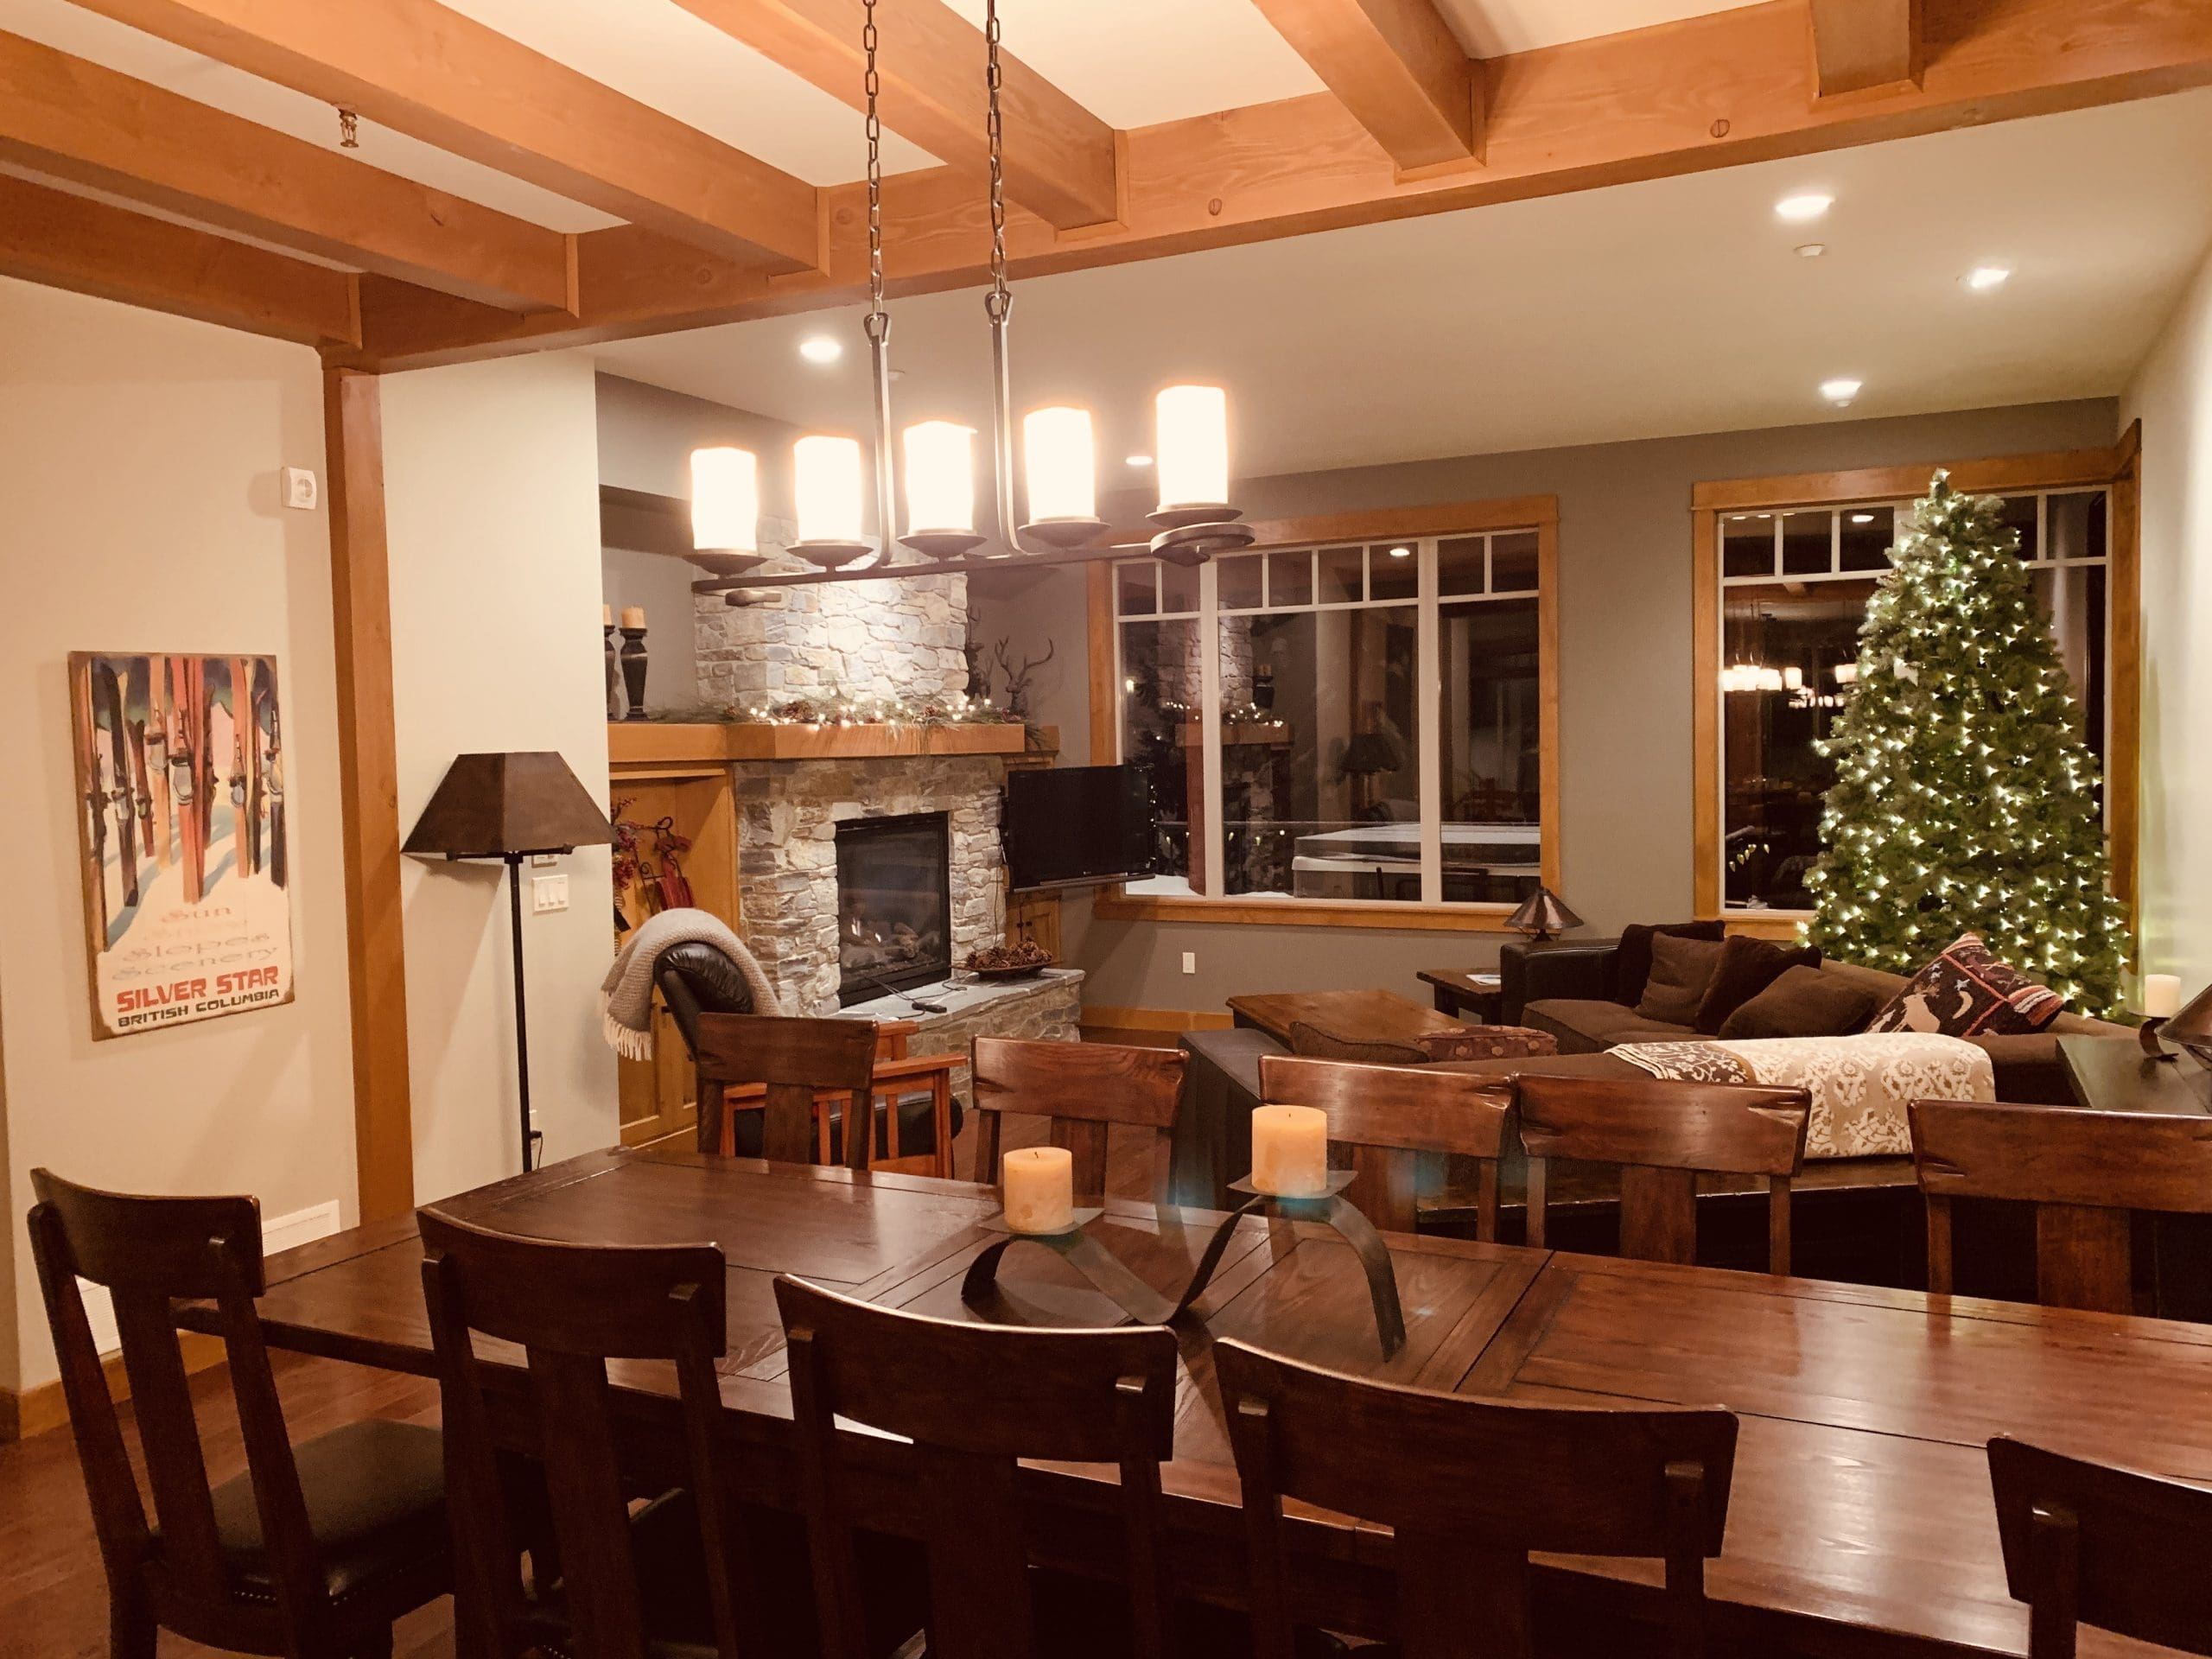 Large Dining table and room for family and friends to spread out with dining nook perfect for kids. Modern, upgraded home on the Knoll with private hot tub, laundry, BBQ, and great ski in and out access to the trails and runs.